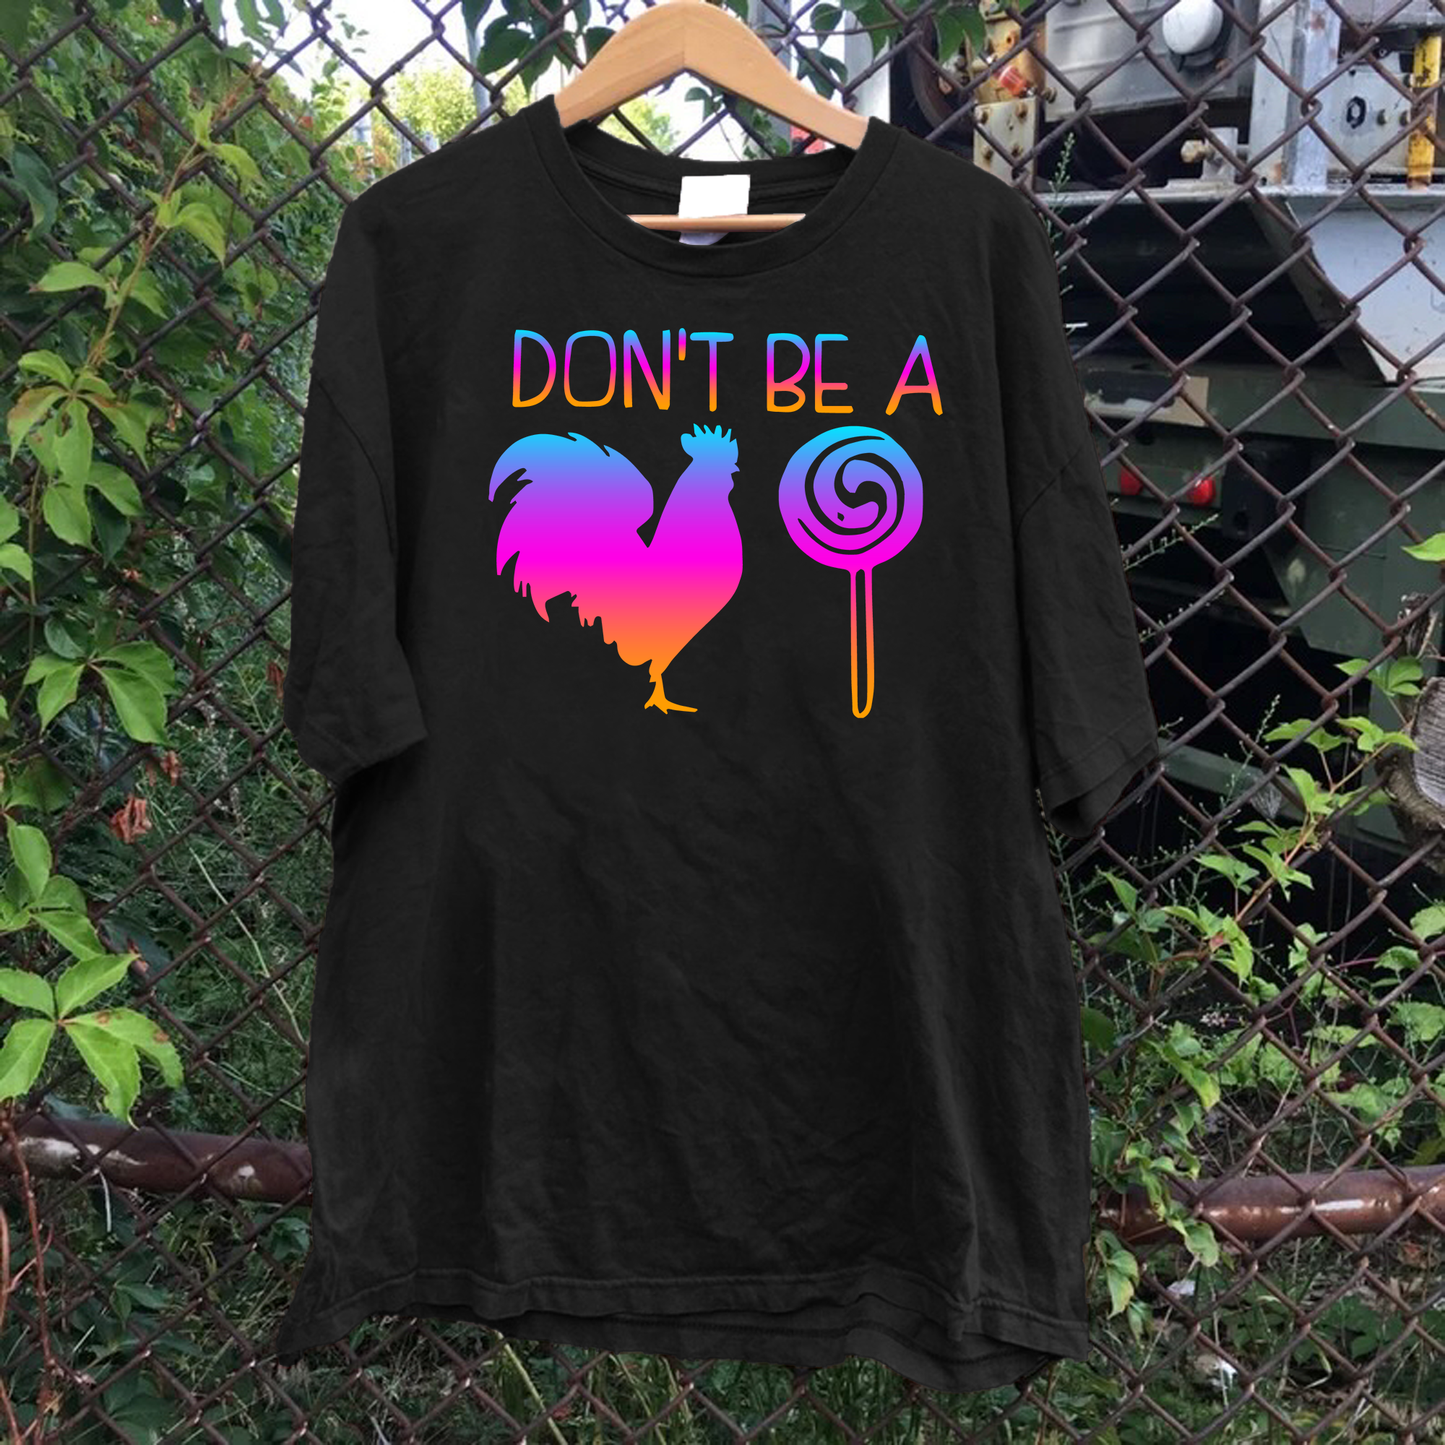 Don't Be A Cocksucker Tee